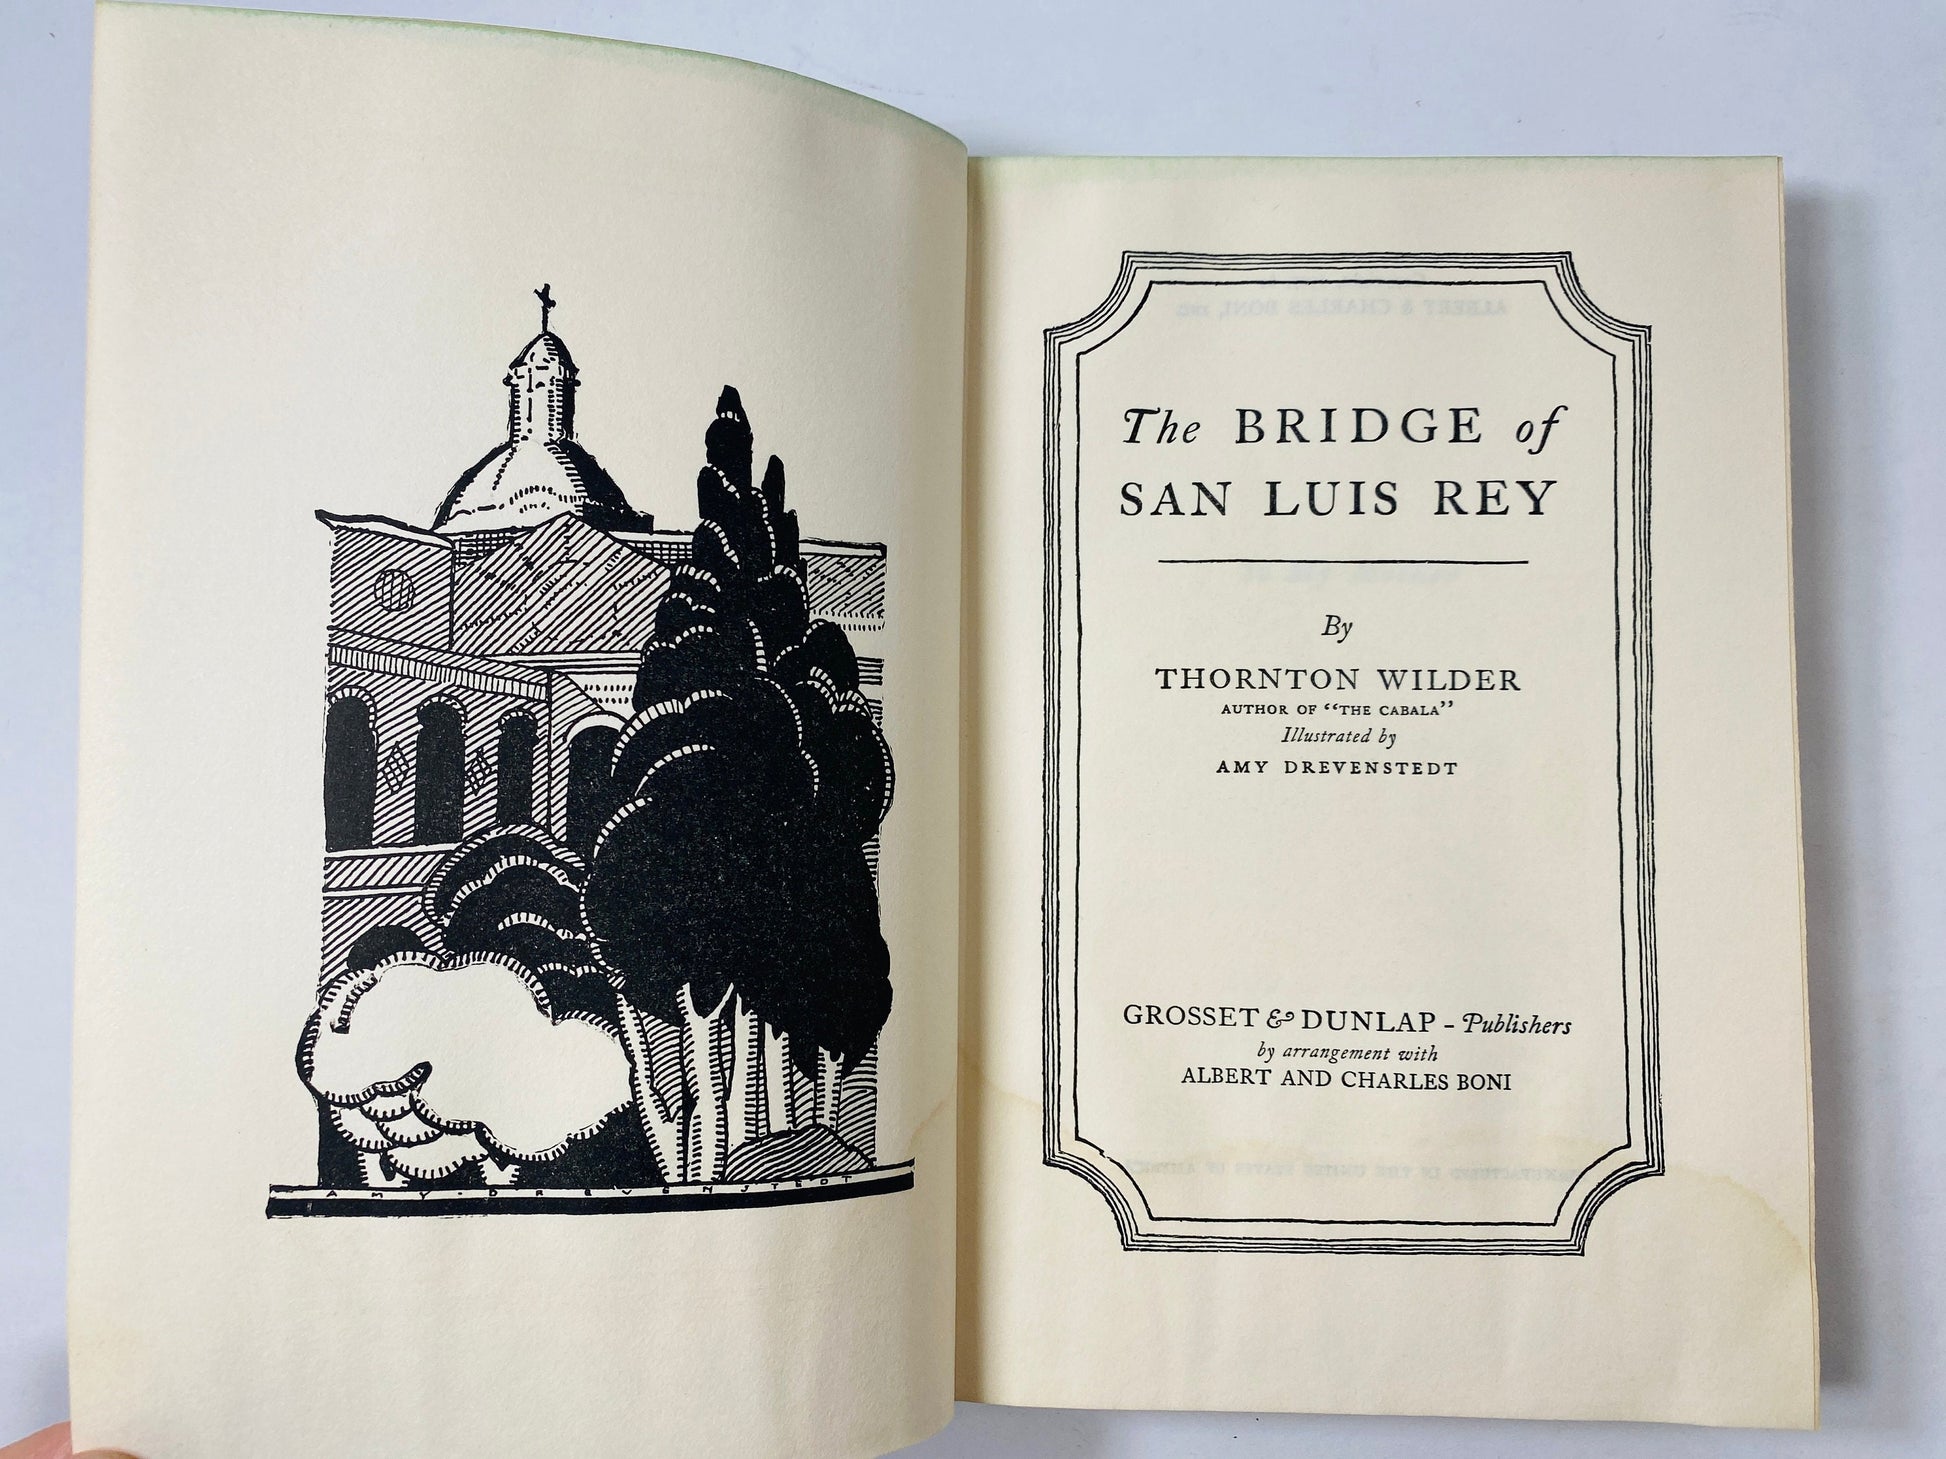 The Bridge of San Luis Rey circa 1928 EARLY PRINTING Pulitzer Prize vintage book by Thornton Wilder POOR Condition. All pages present.